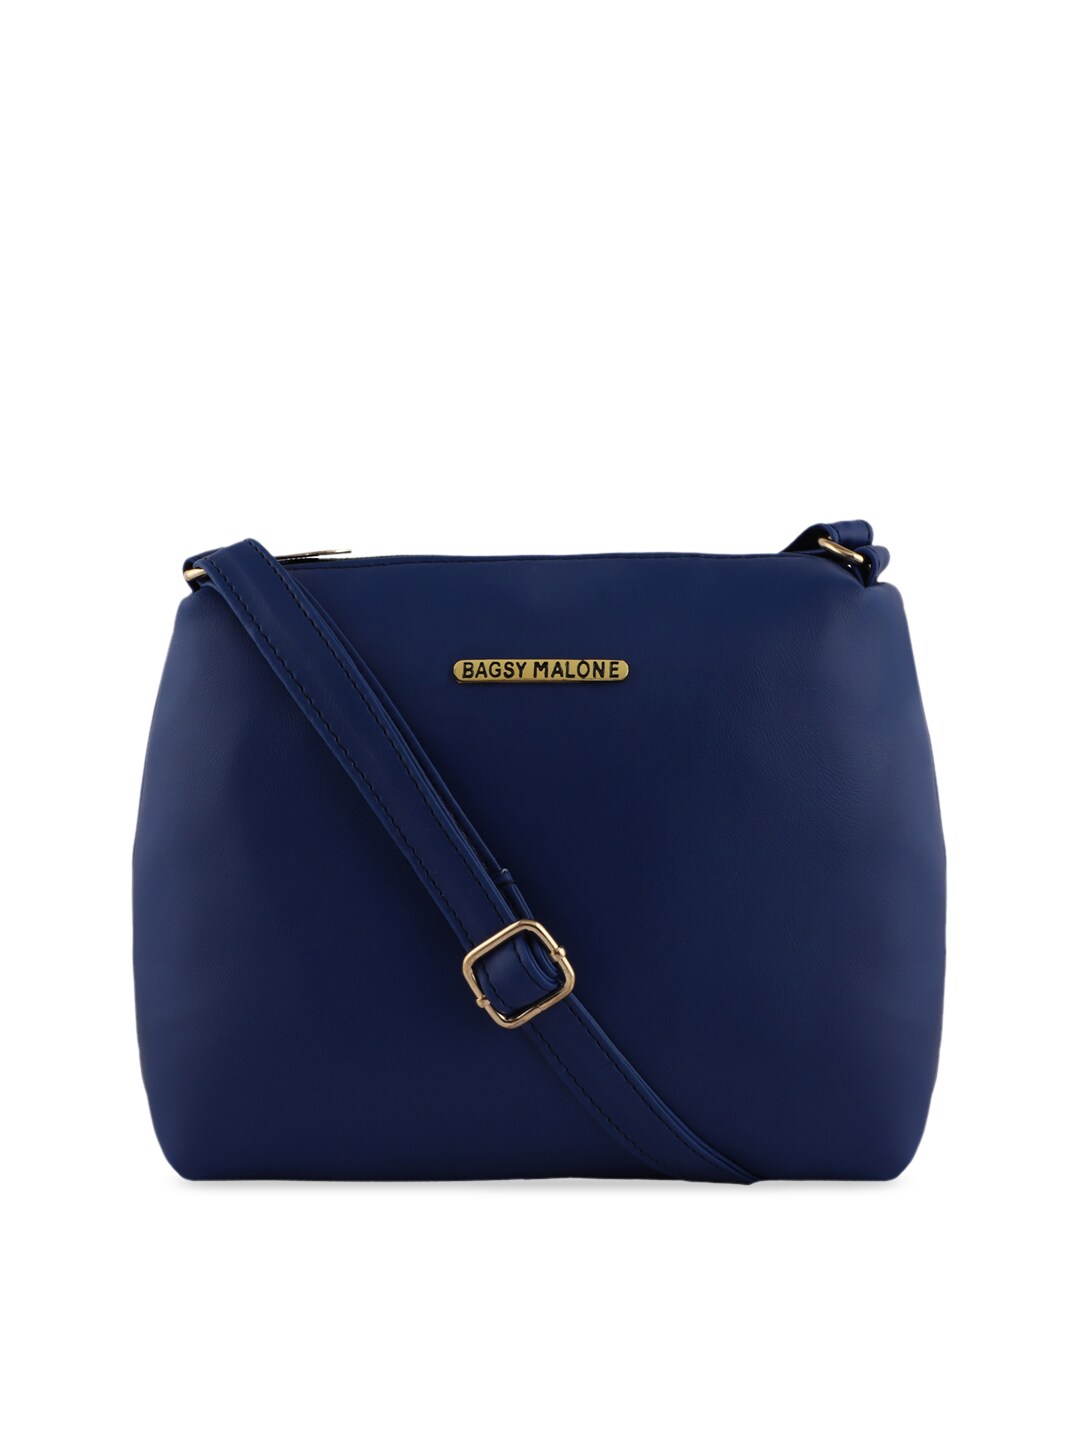 Bagsy Malone Navy Blue Solid Sling Bag Price in India